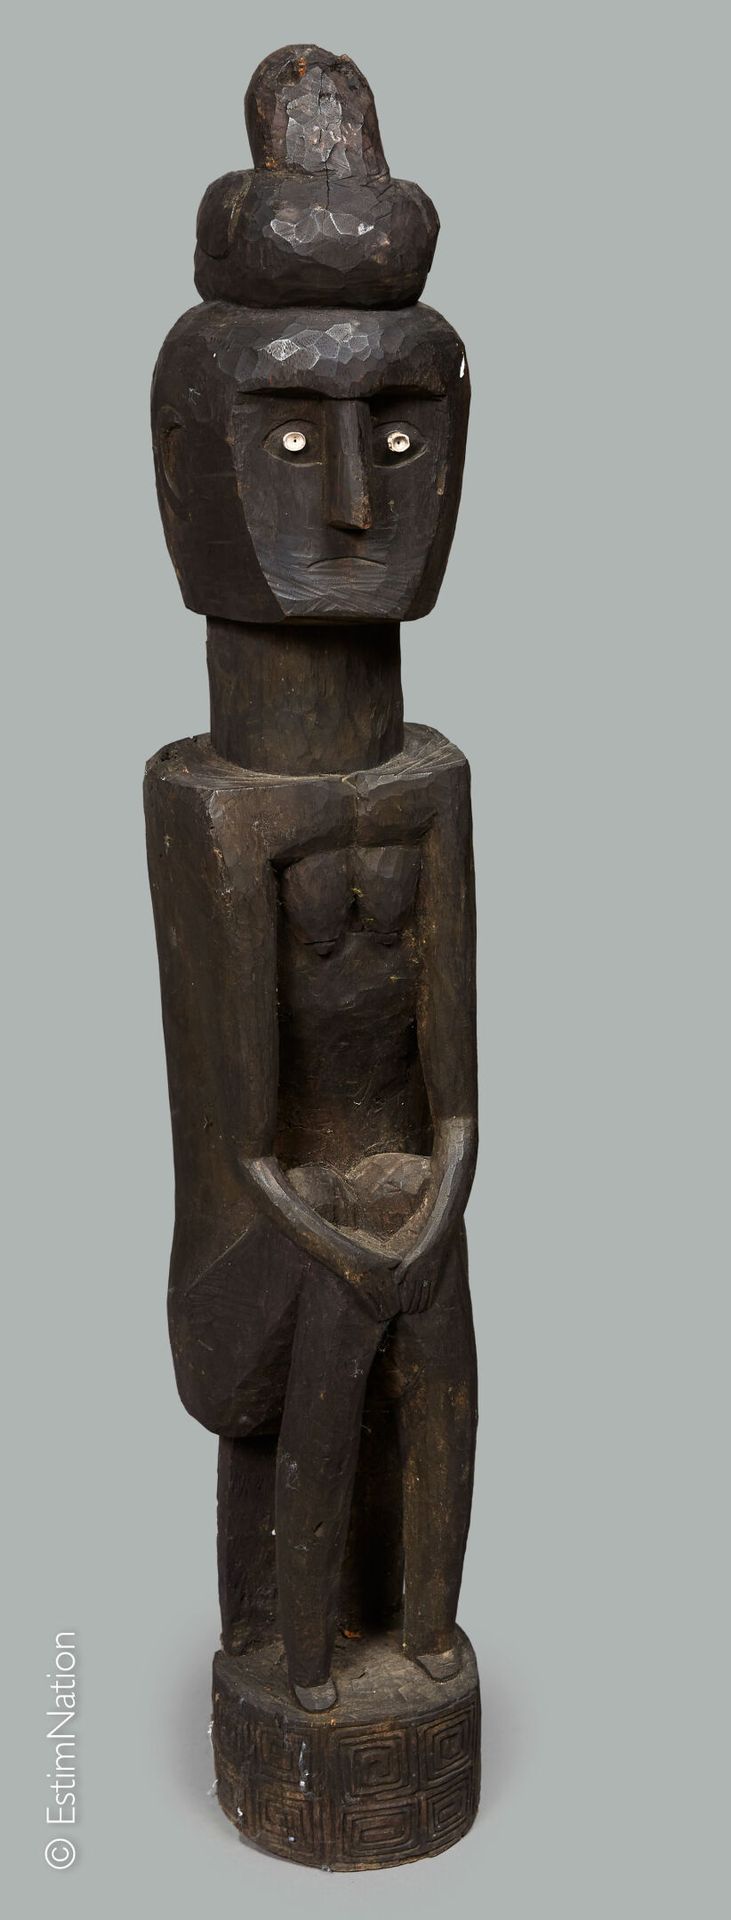 INDONESIE - TIMOR TIMOR



Carved wooden subject with dark patina representing a&hellip;